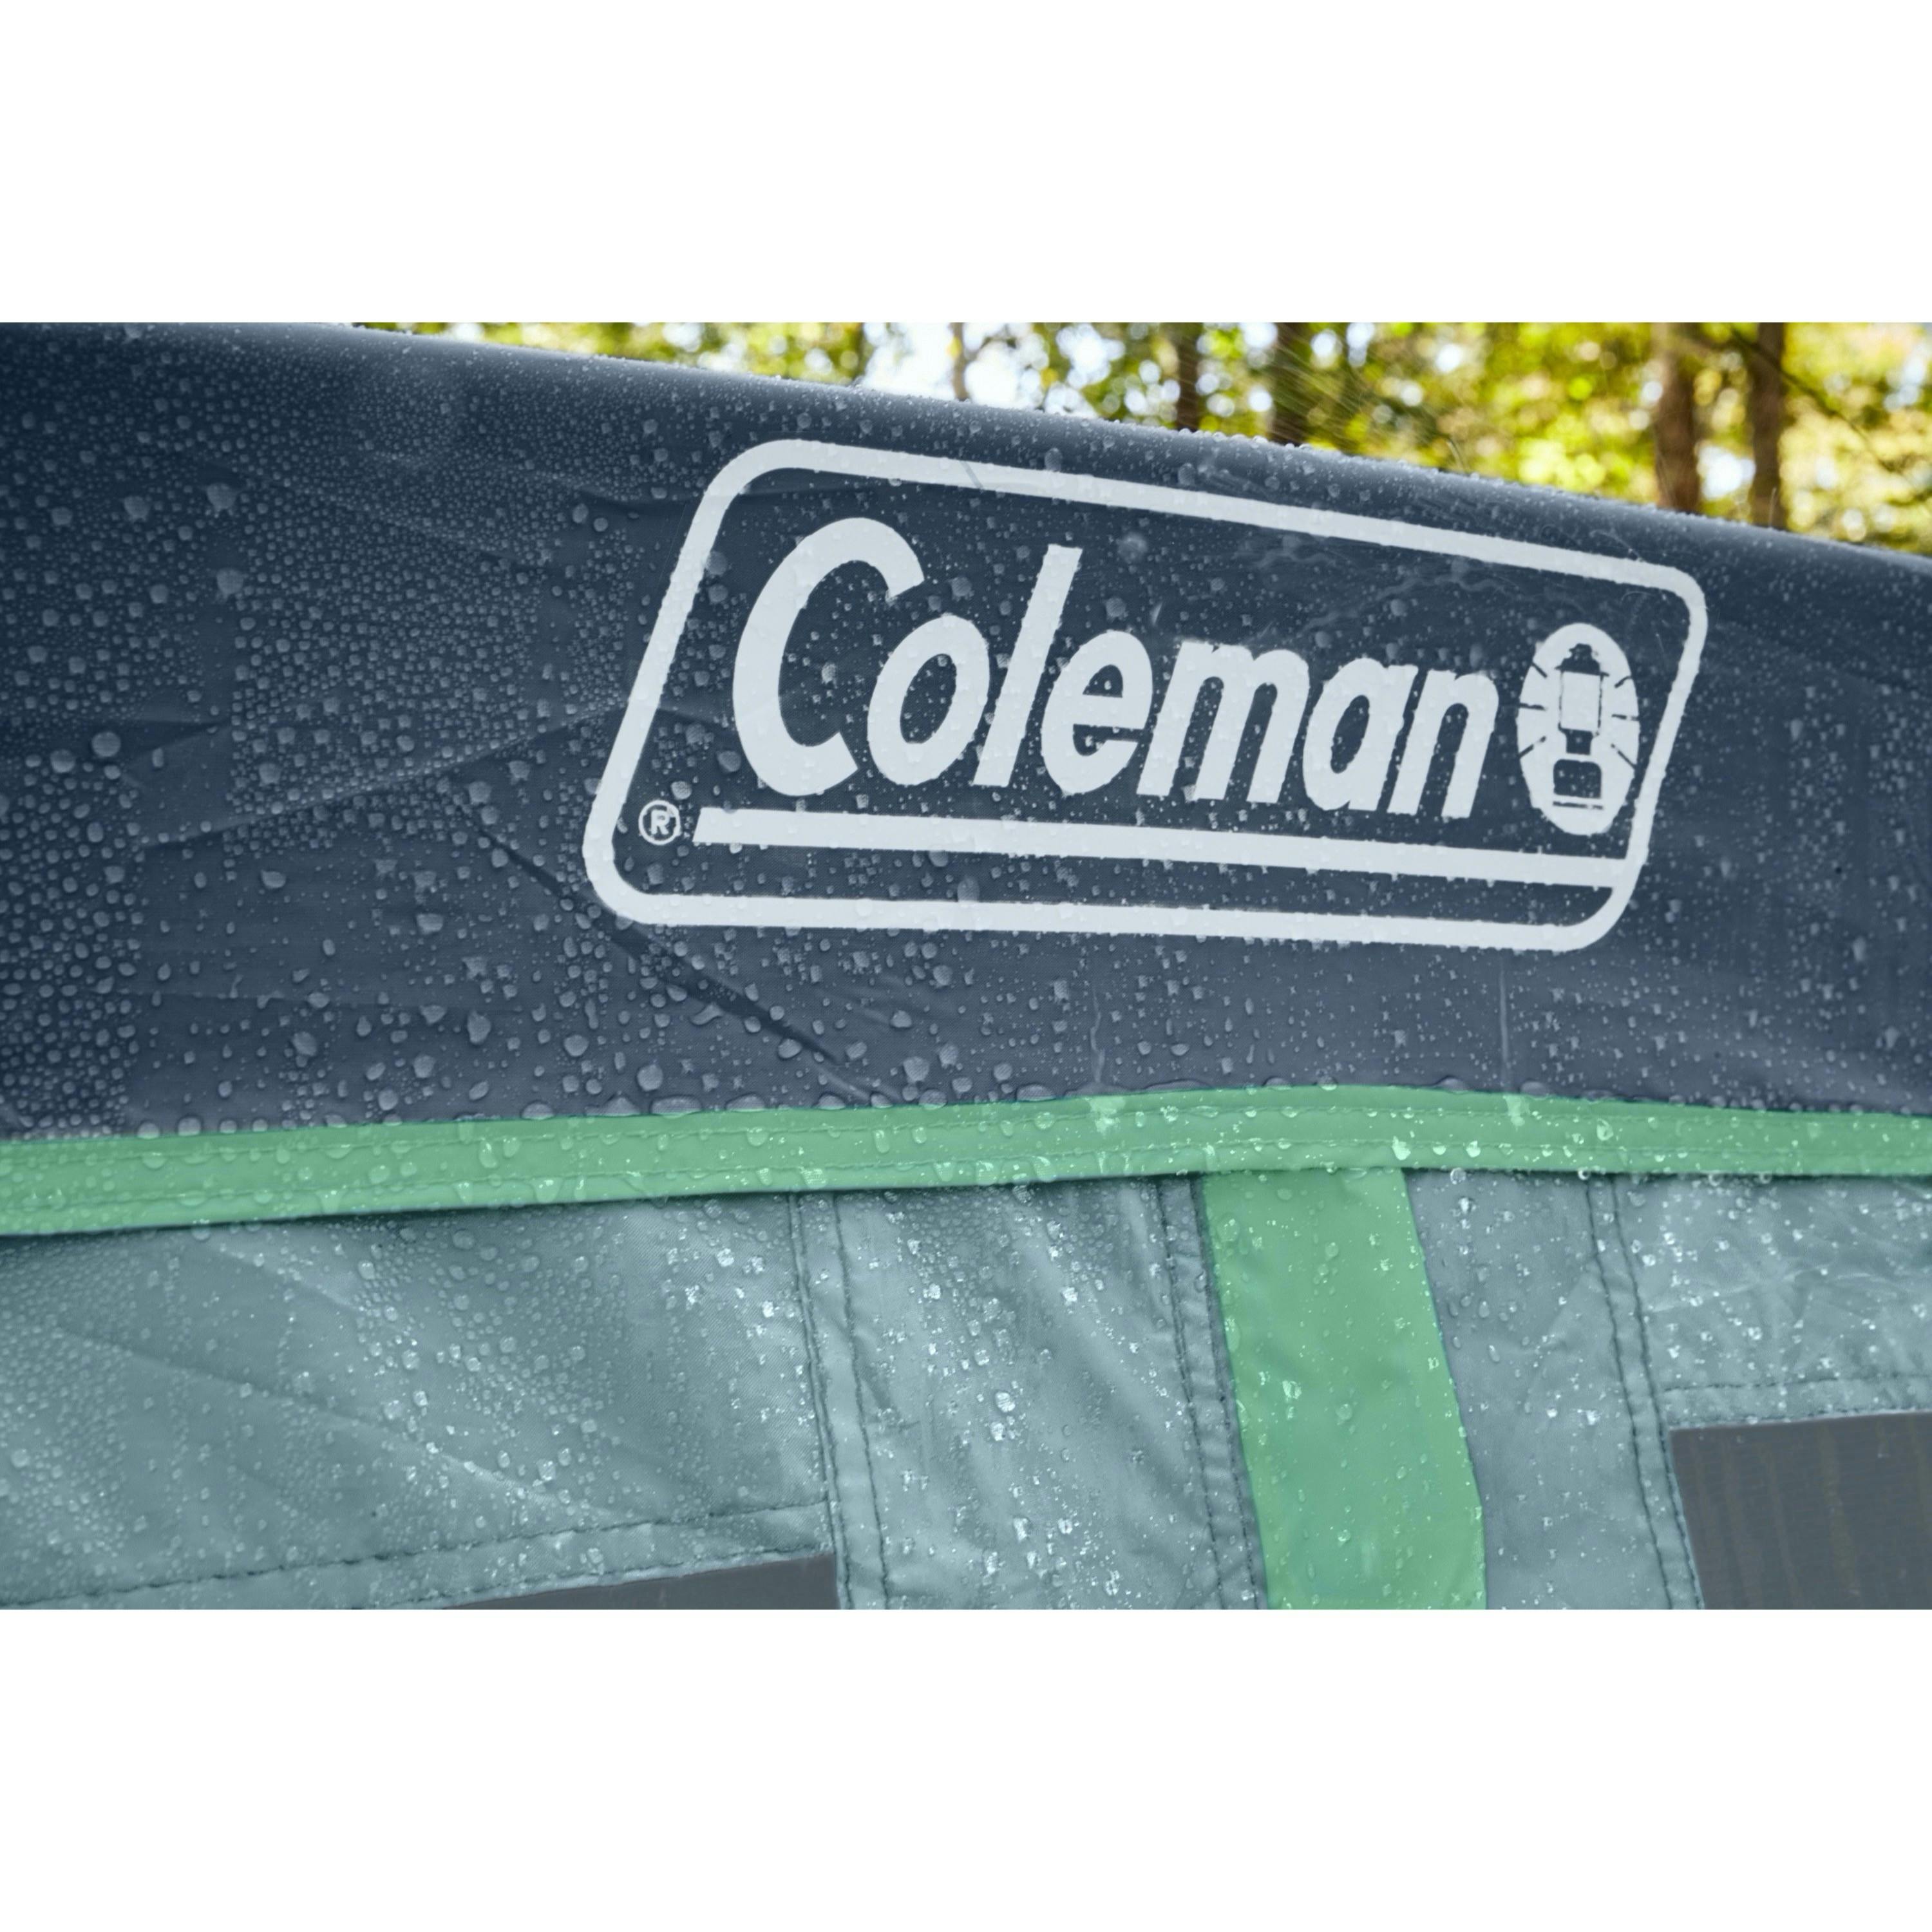 Coleman Skylodge Instant Camping Tent with Screen Room · 10 Person · Blue Nights